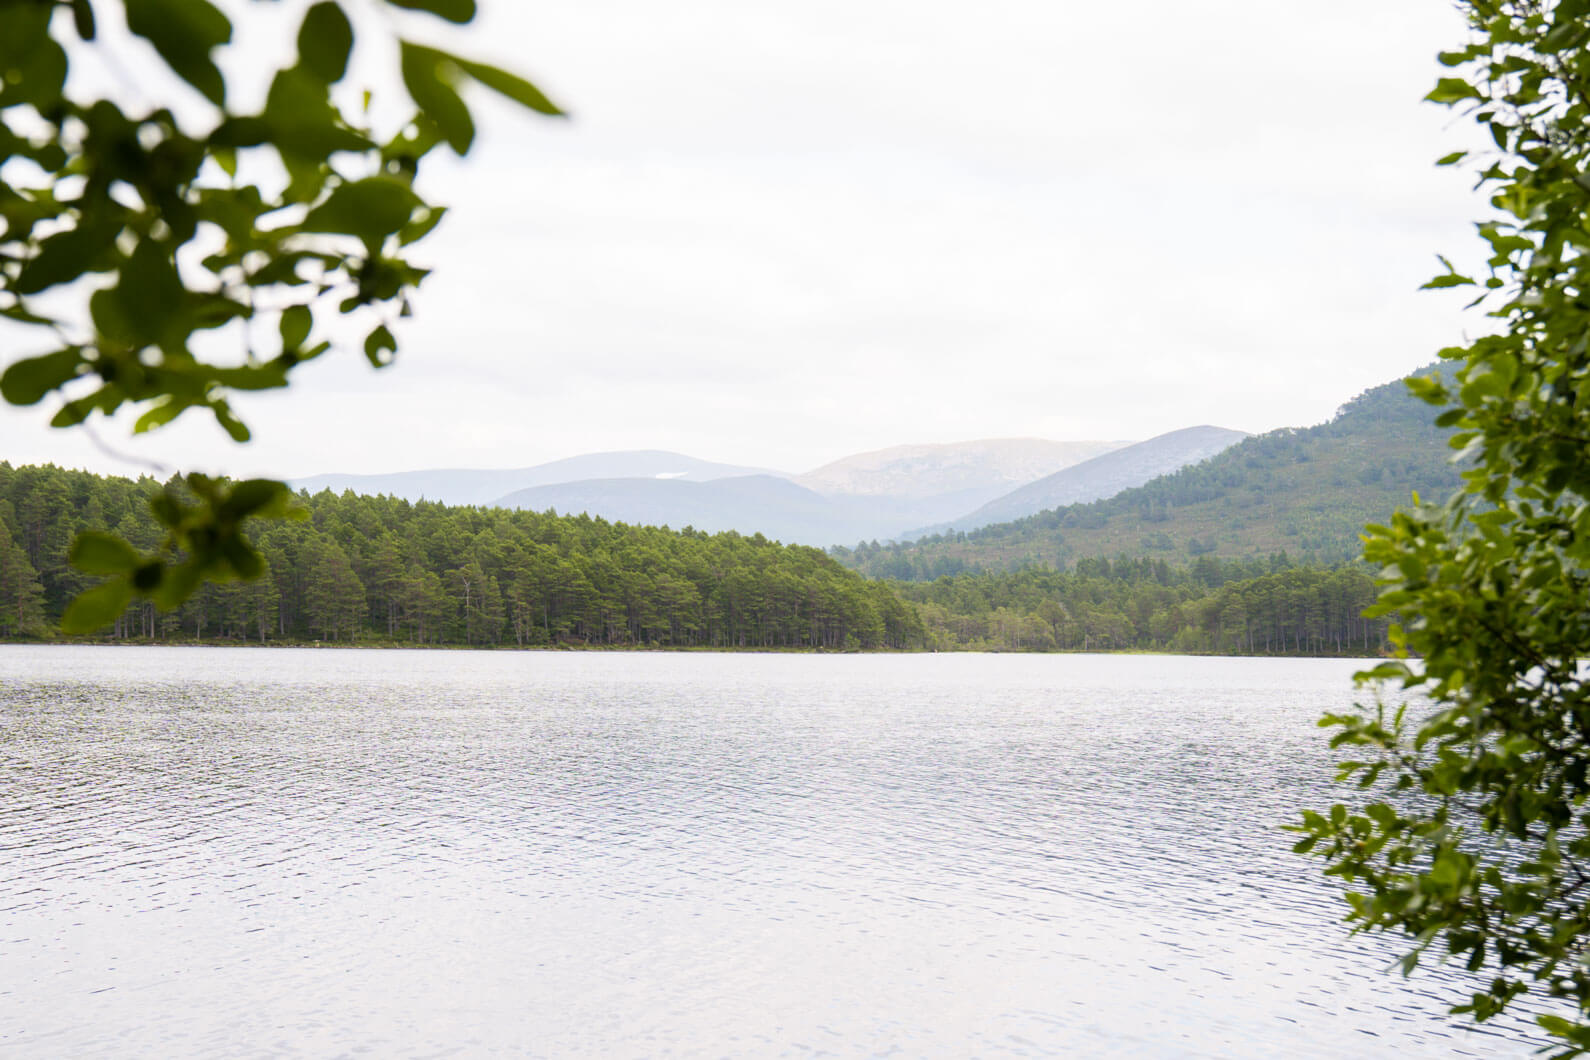 A complete guide to Cairngorms National Park, Scotland